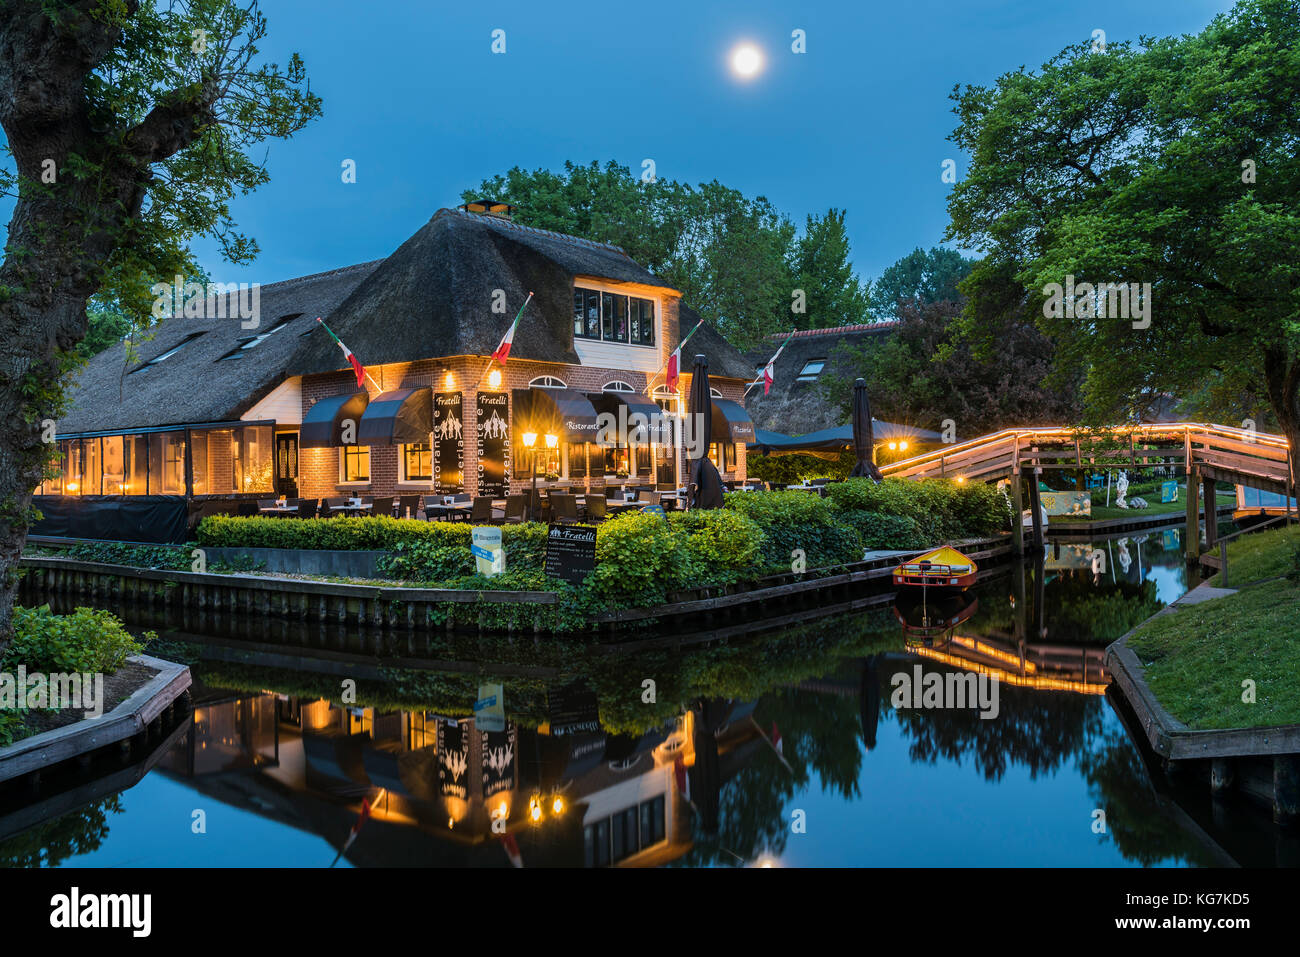 Giethoorn, The Netherlands - May 19., 2016:  Pizzaria in the evening with full moon in the small, picturesque town of Giethoorn, Overijssel, Netherlan Stock Photo